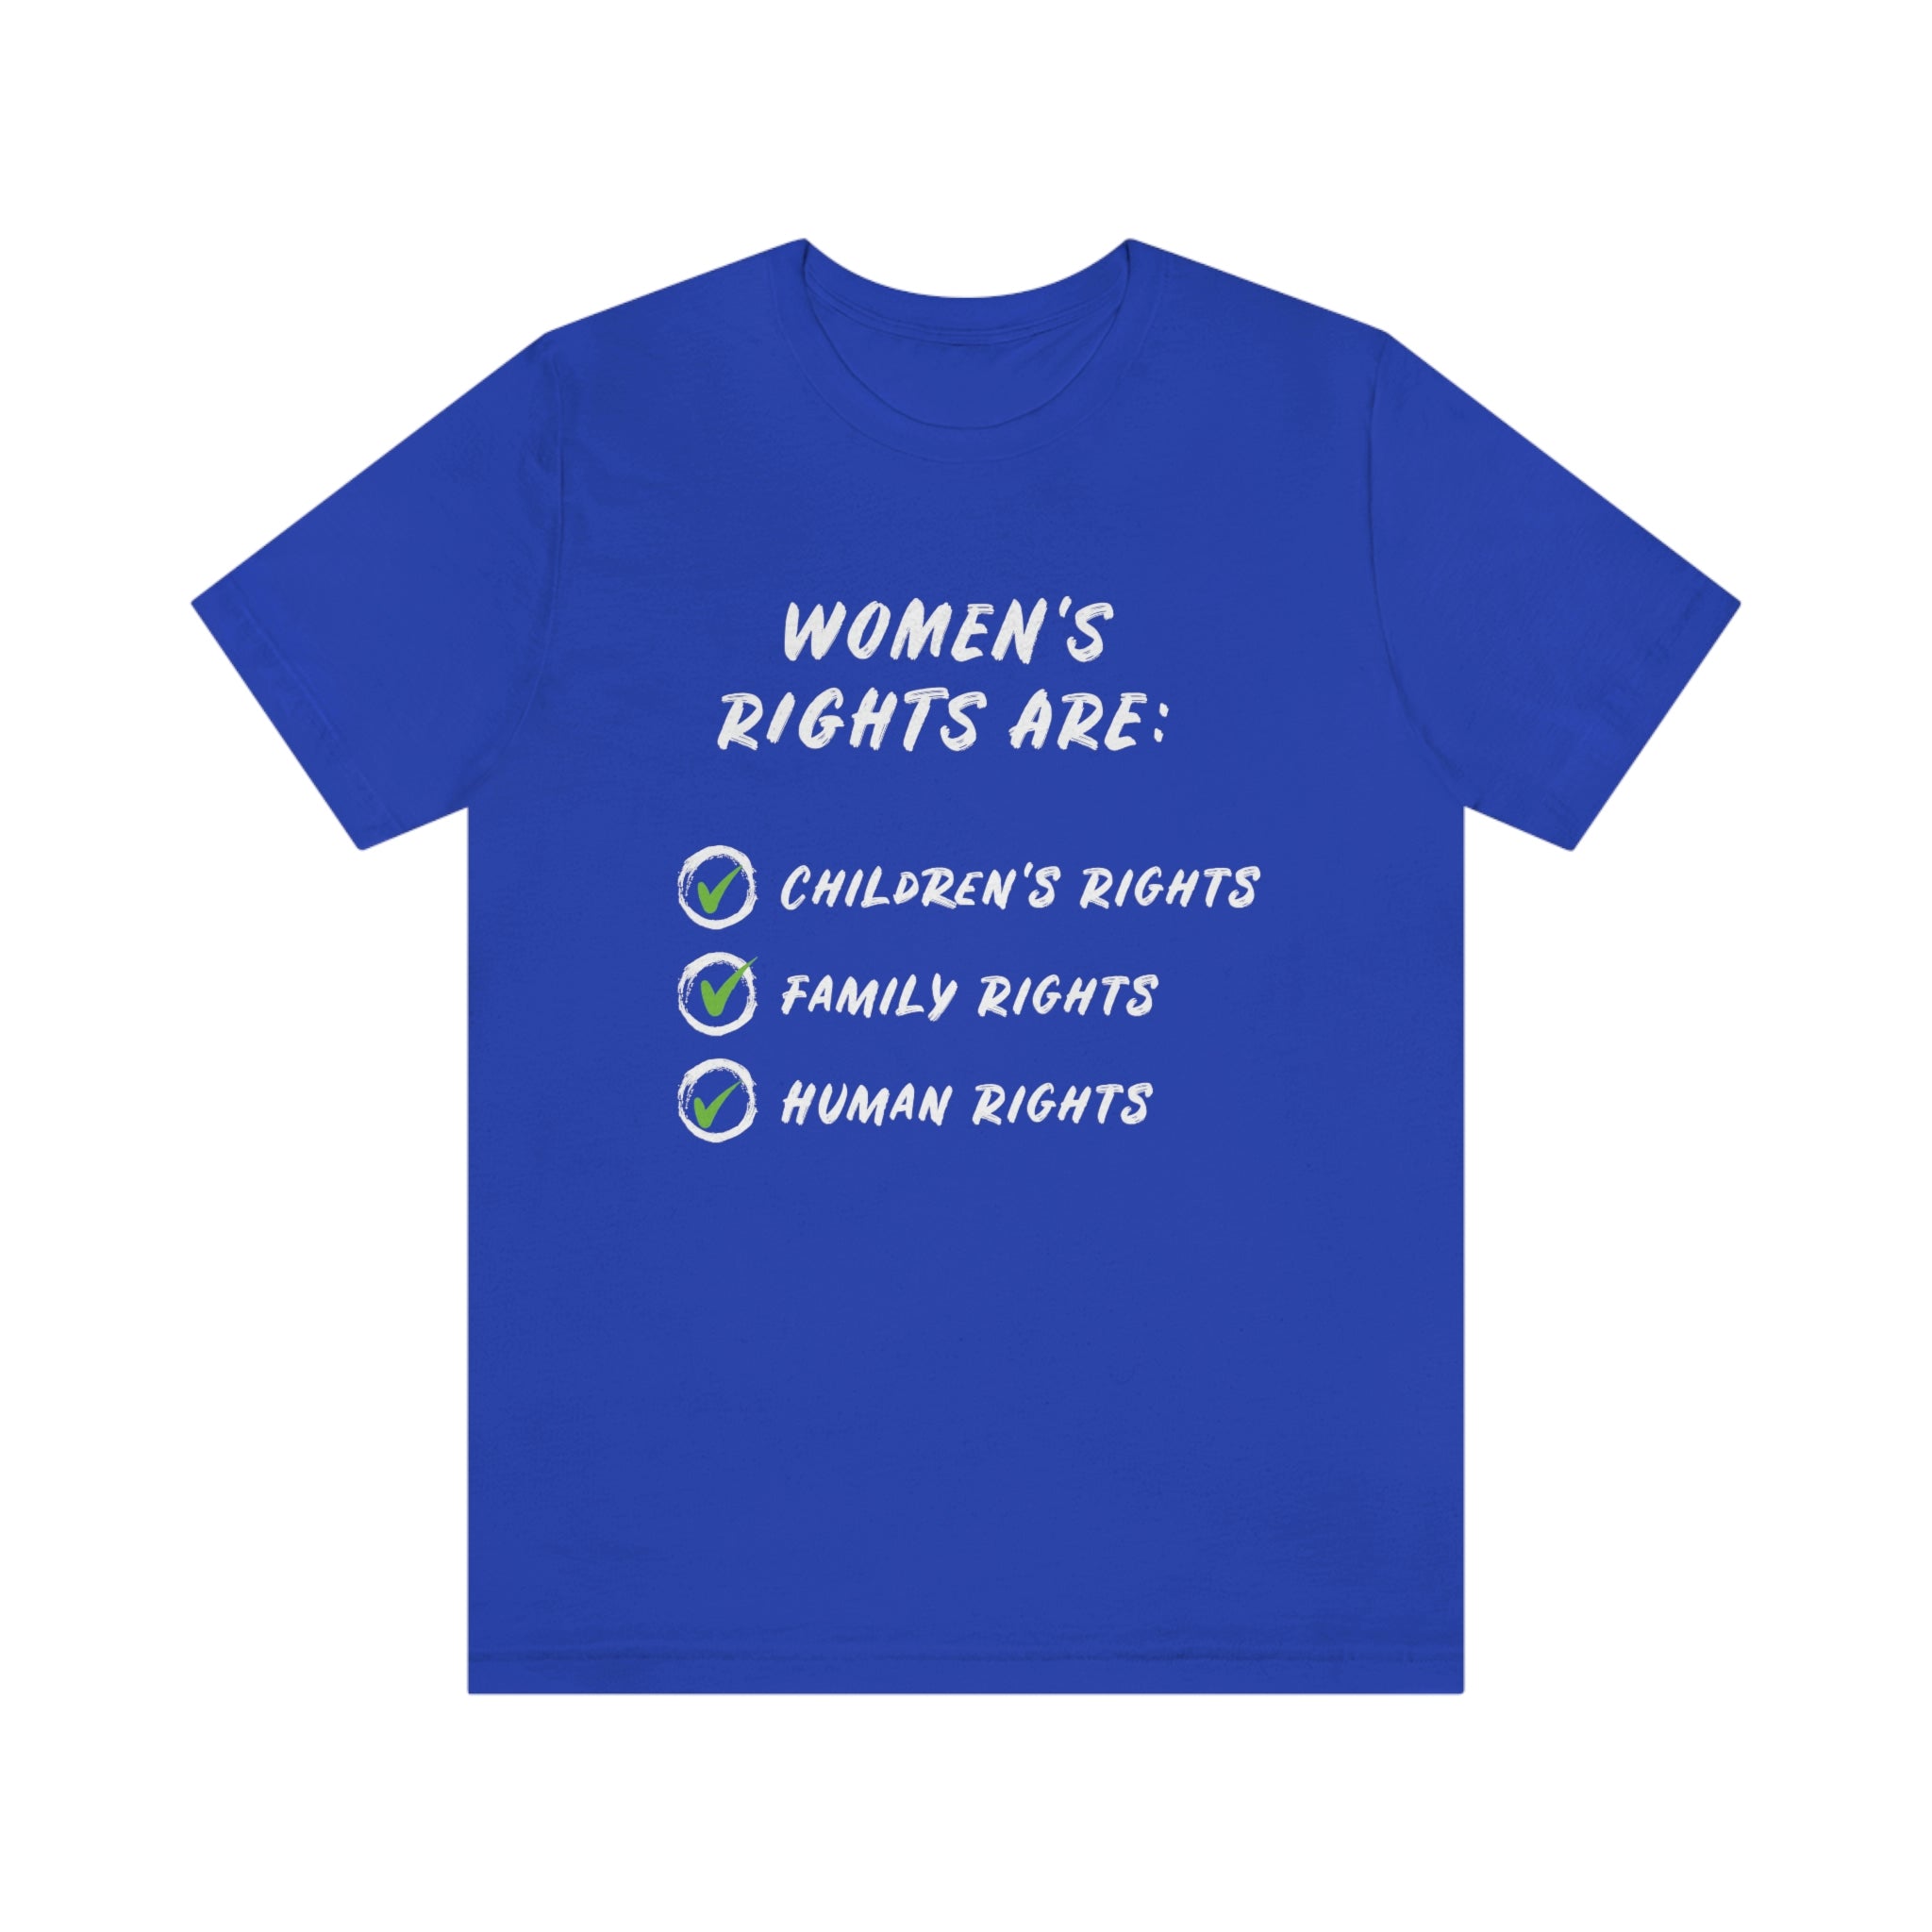 Women's rights are everyone's rights : Unisex 100% Premium Comfy Cotton T-Shirt